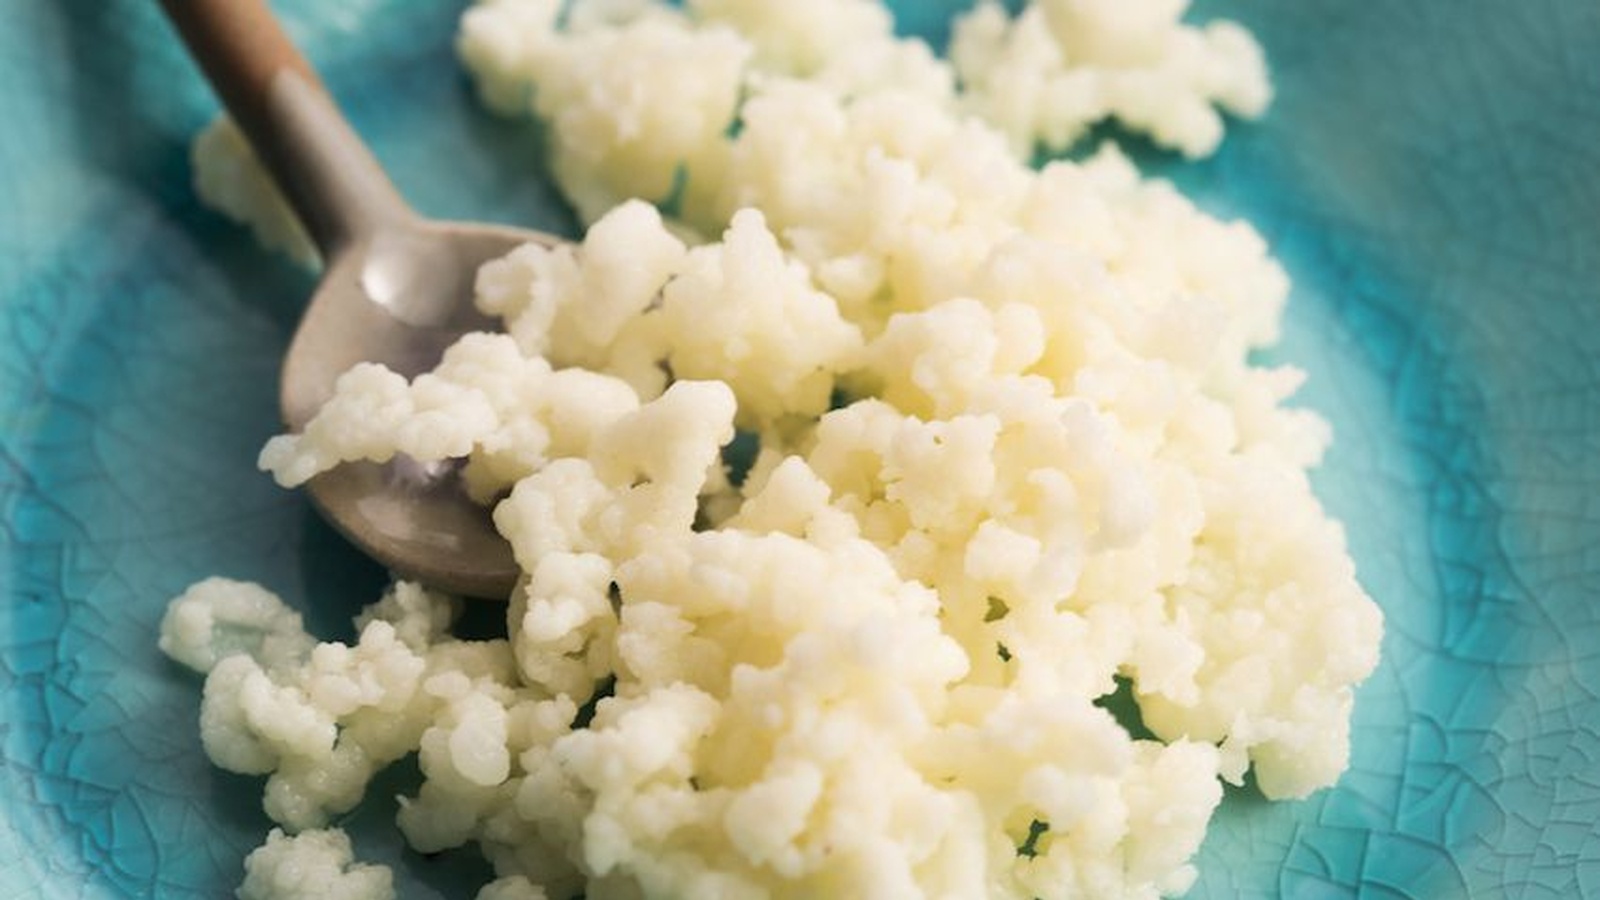 Kefir: What Is It And Why Should You Use It